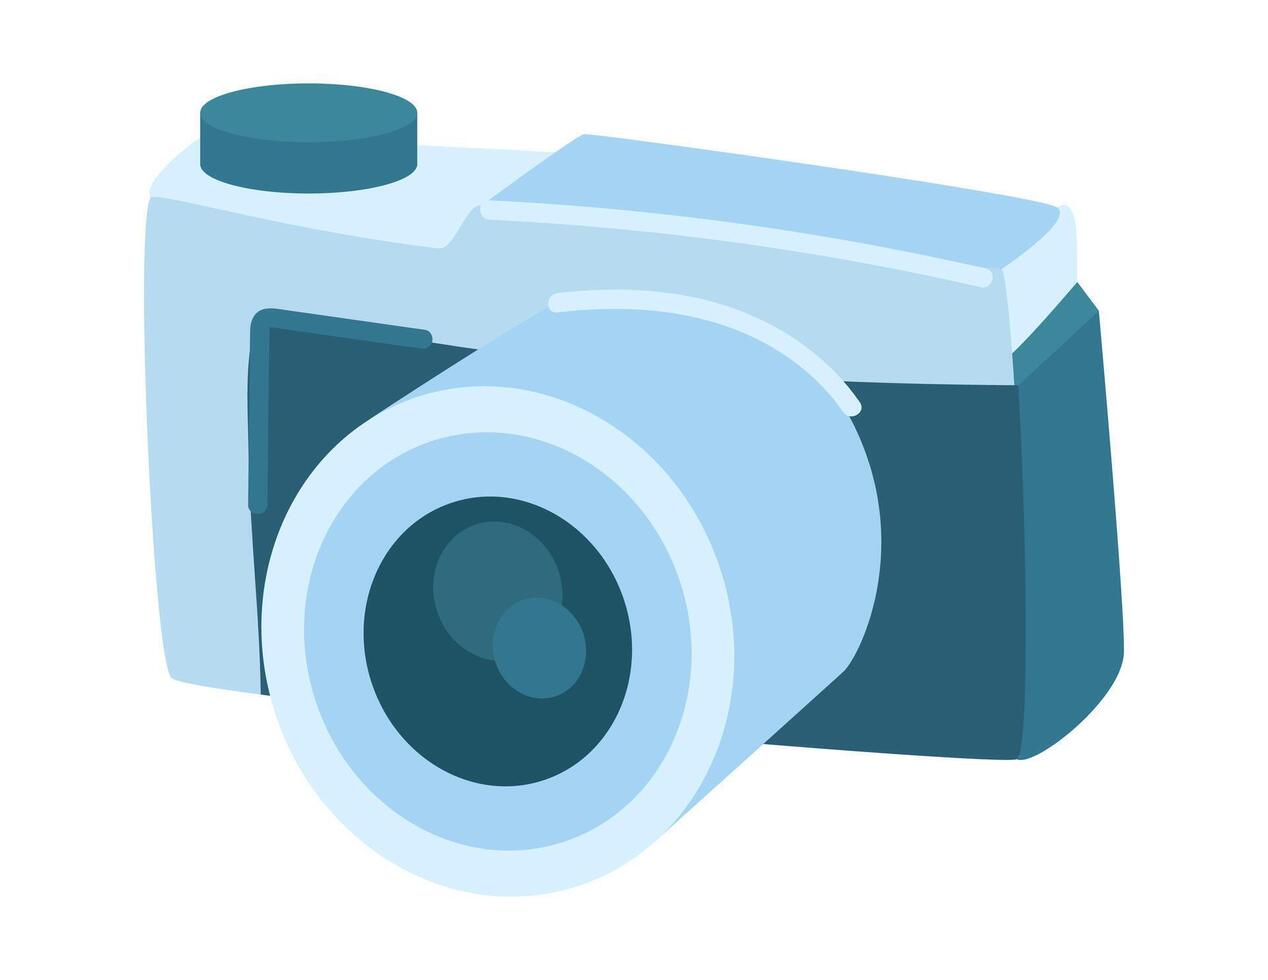 Camera in flat design. Professional digital photo equipment with lens. illustration isolated. vector